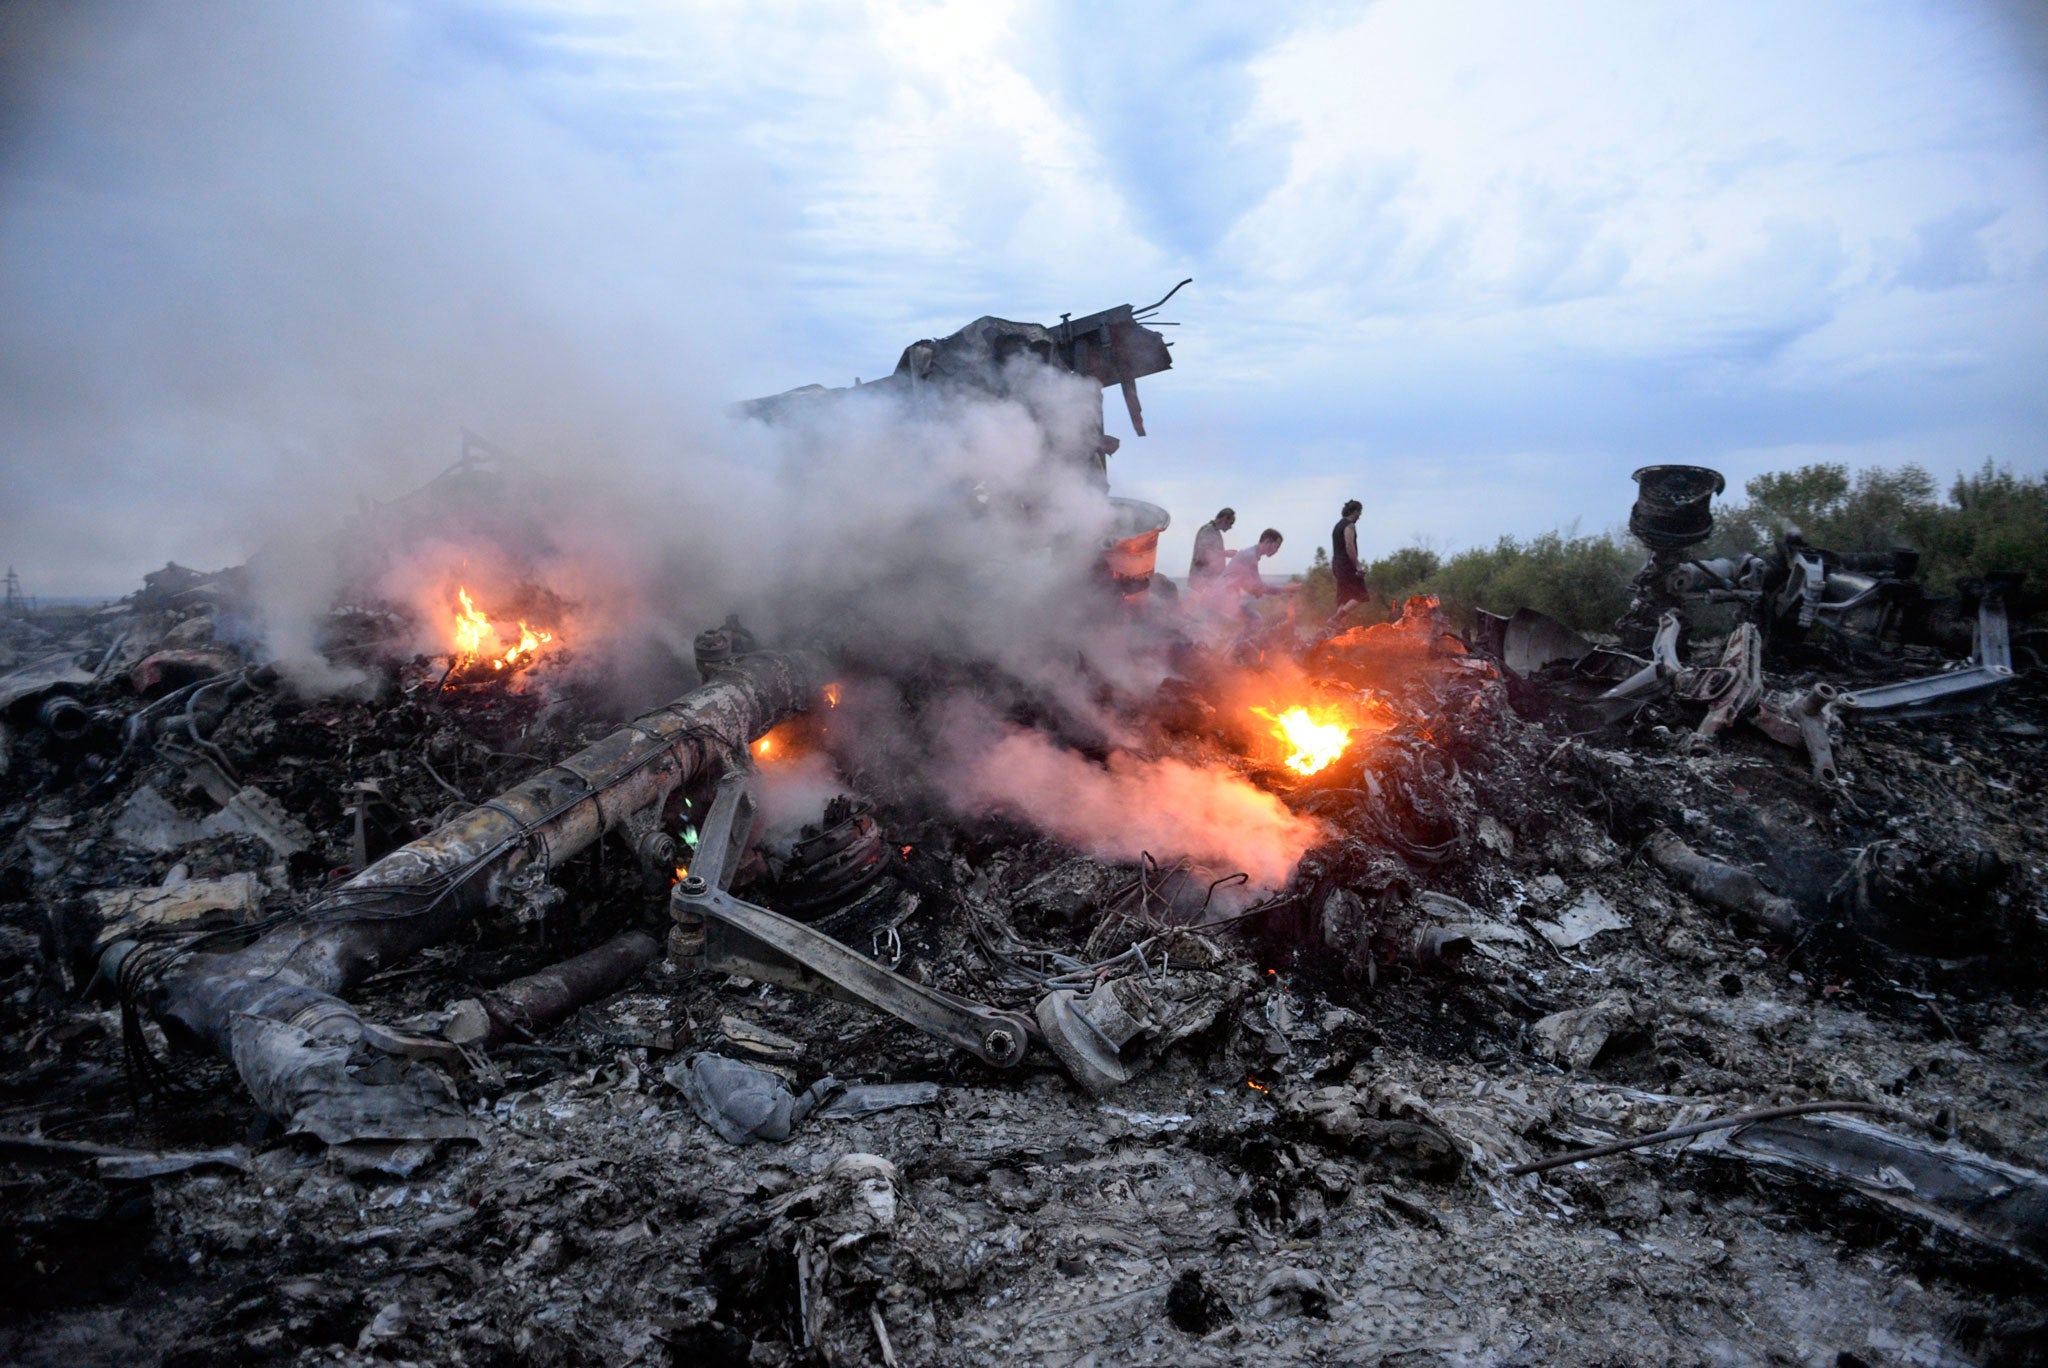 The Dutch Safety Board report is expected to deliver a verdict on the cause of the crash